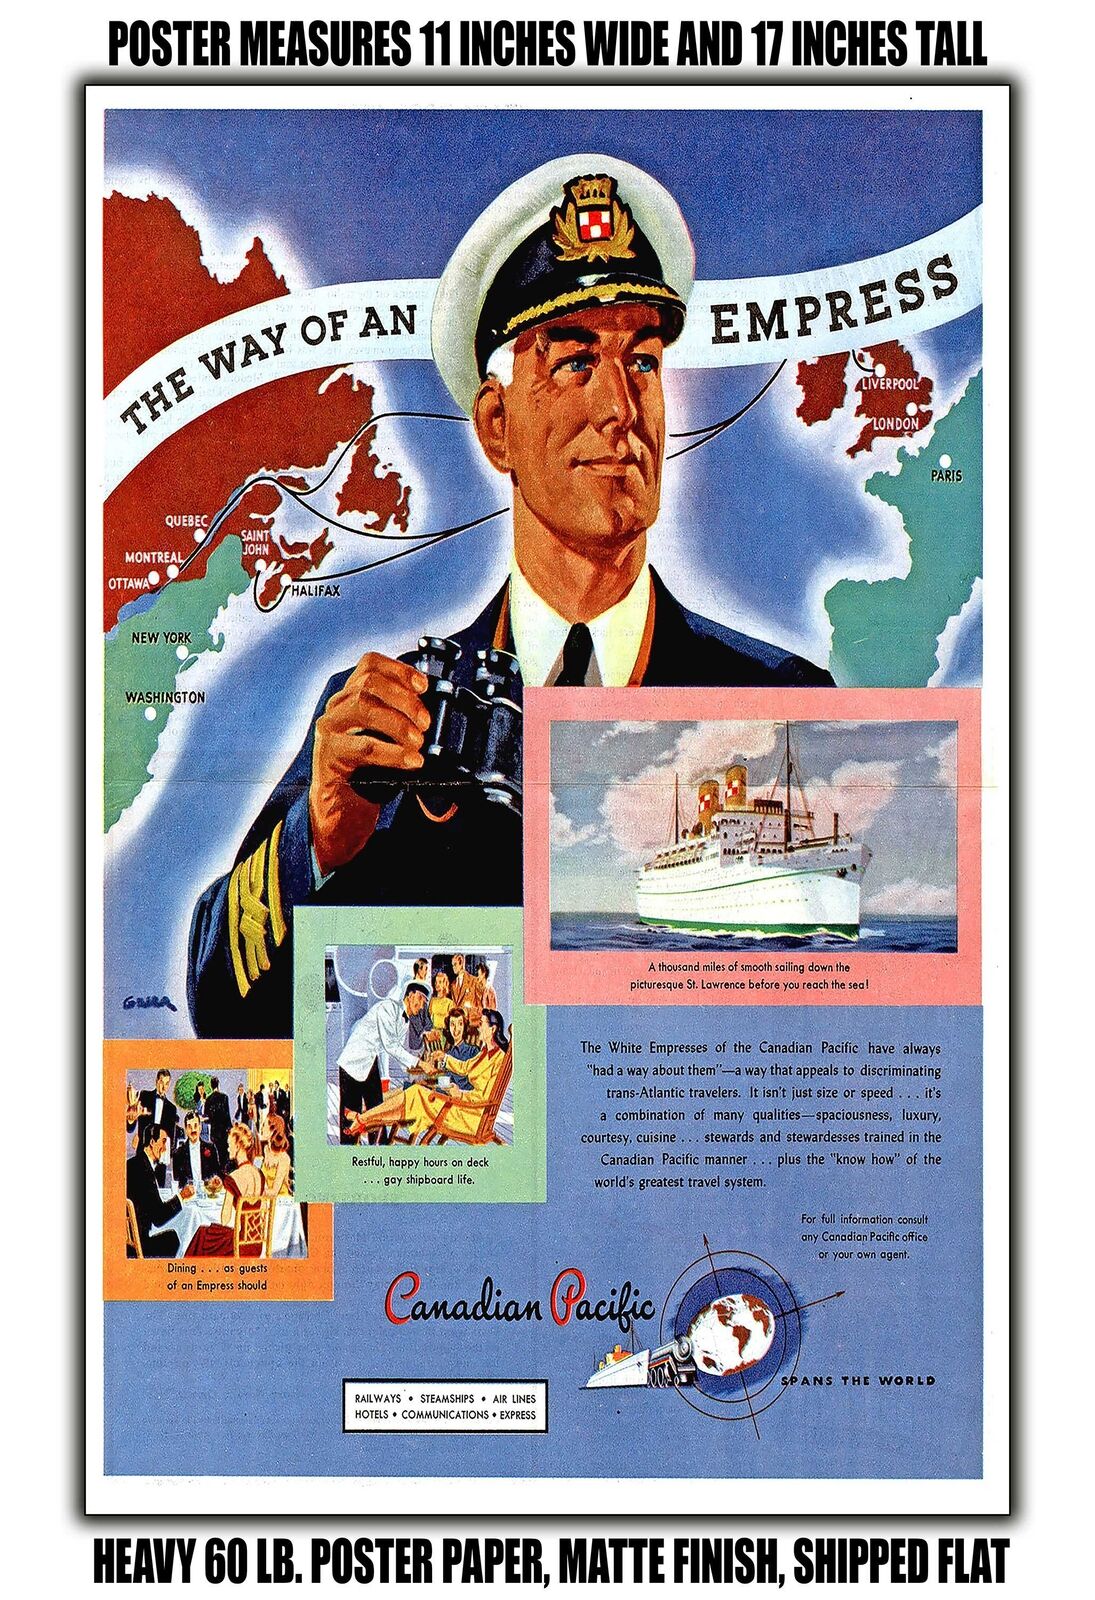 11x17 POSTER - 1947 The Way of an Empress Canadian Pacific